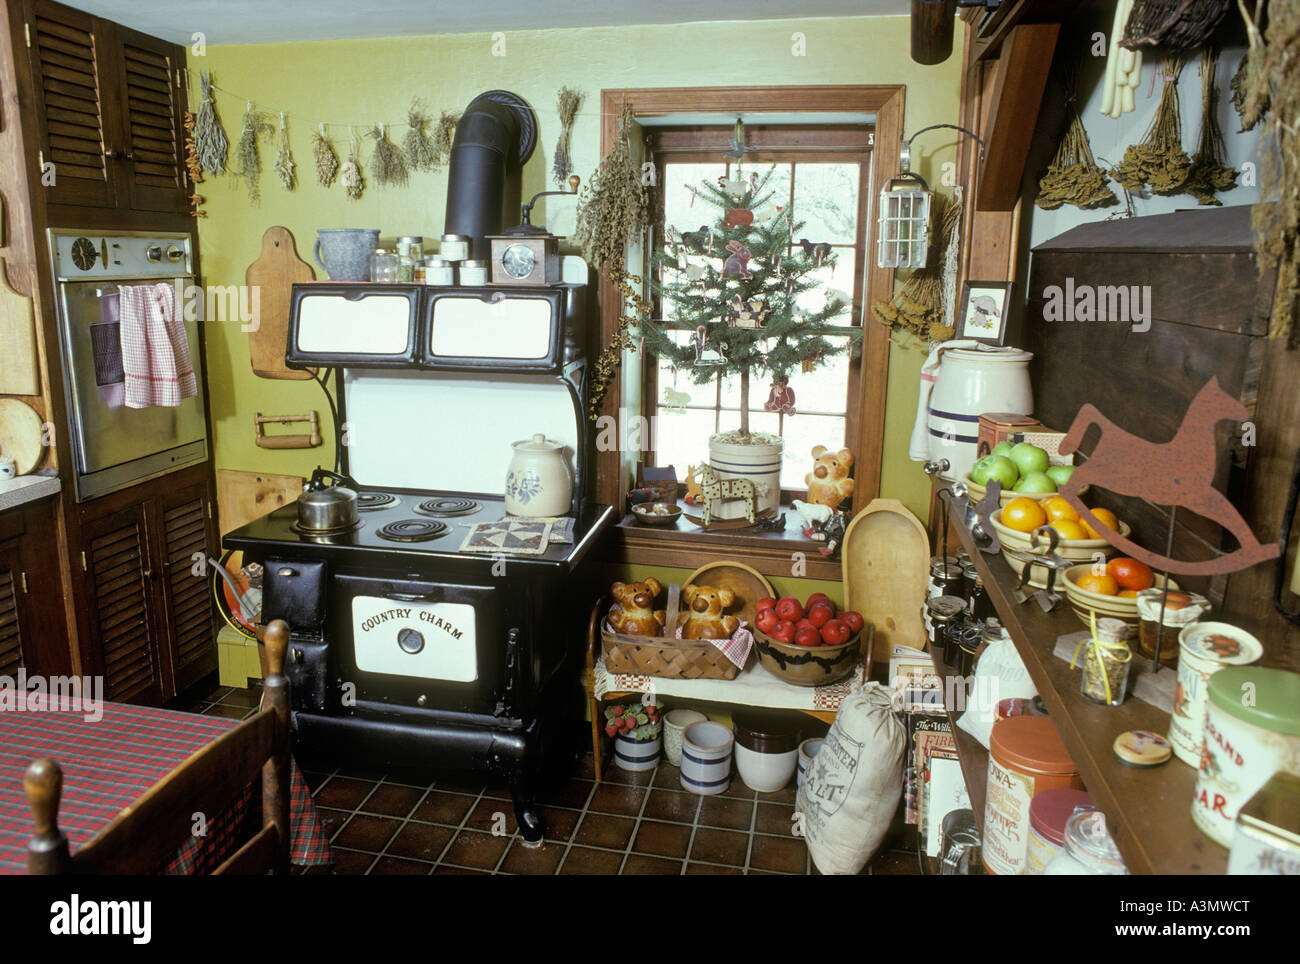 https://c8.alamy.com/comp/A3MWCT/early-american-kitchen-room-fireplace-tree-ornaments-antique-black-A3MWCT.jpg